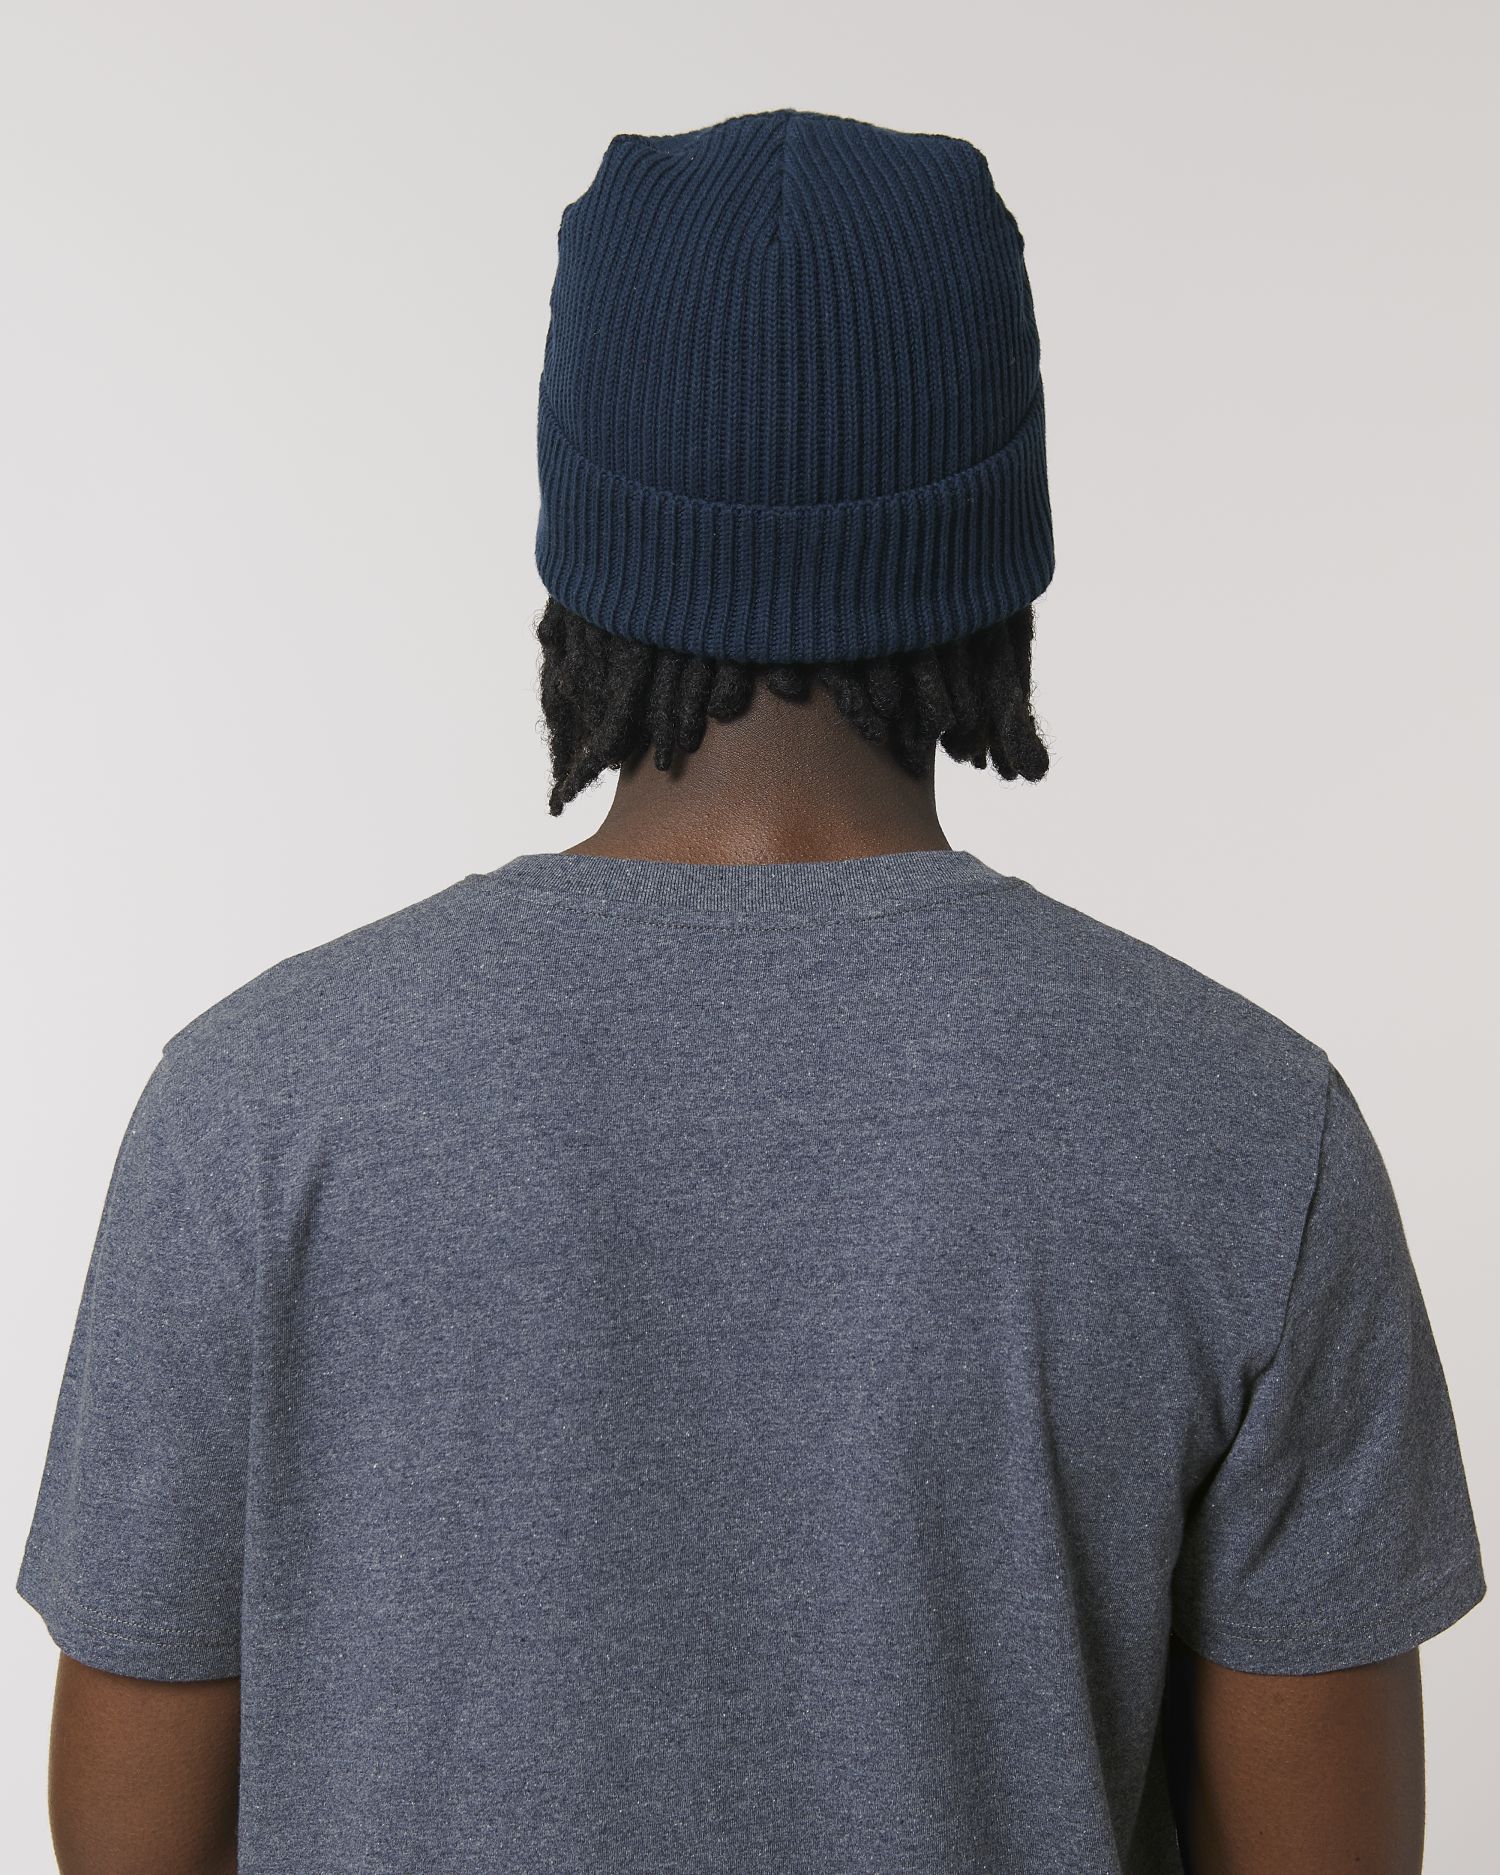  Fisherman Beanie in Farbe French Navy